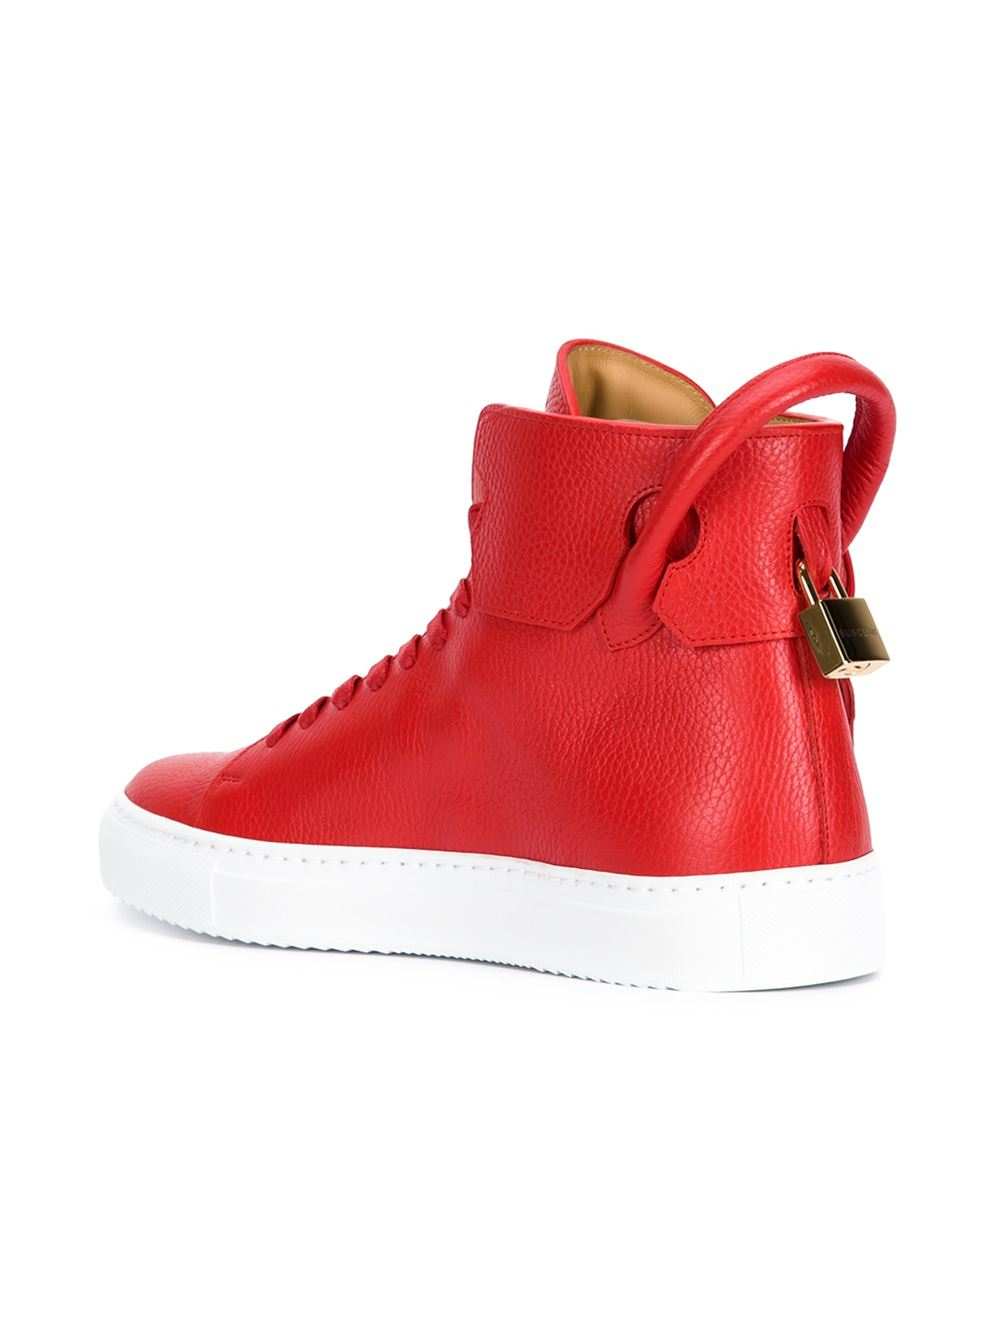 Details about   BUSCEMI Men's Shoes Sneakers Red Pelle Calf Leather Gold 125MM Handmade ITALY 